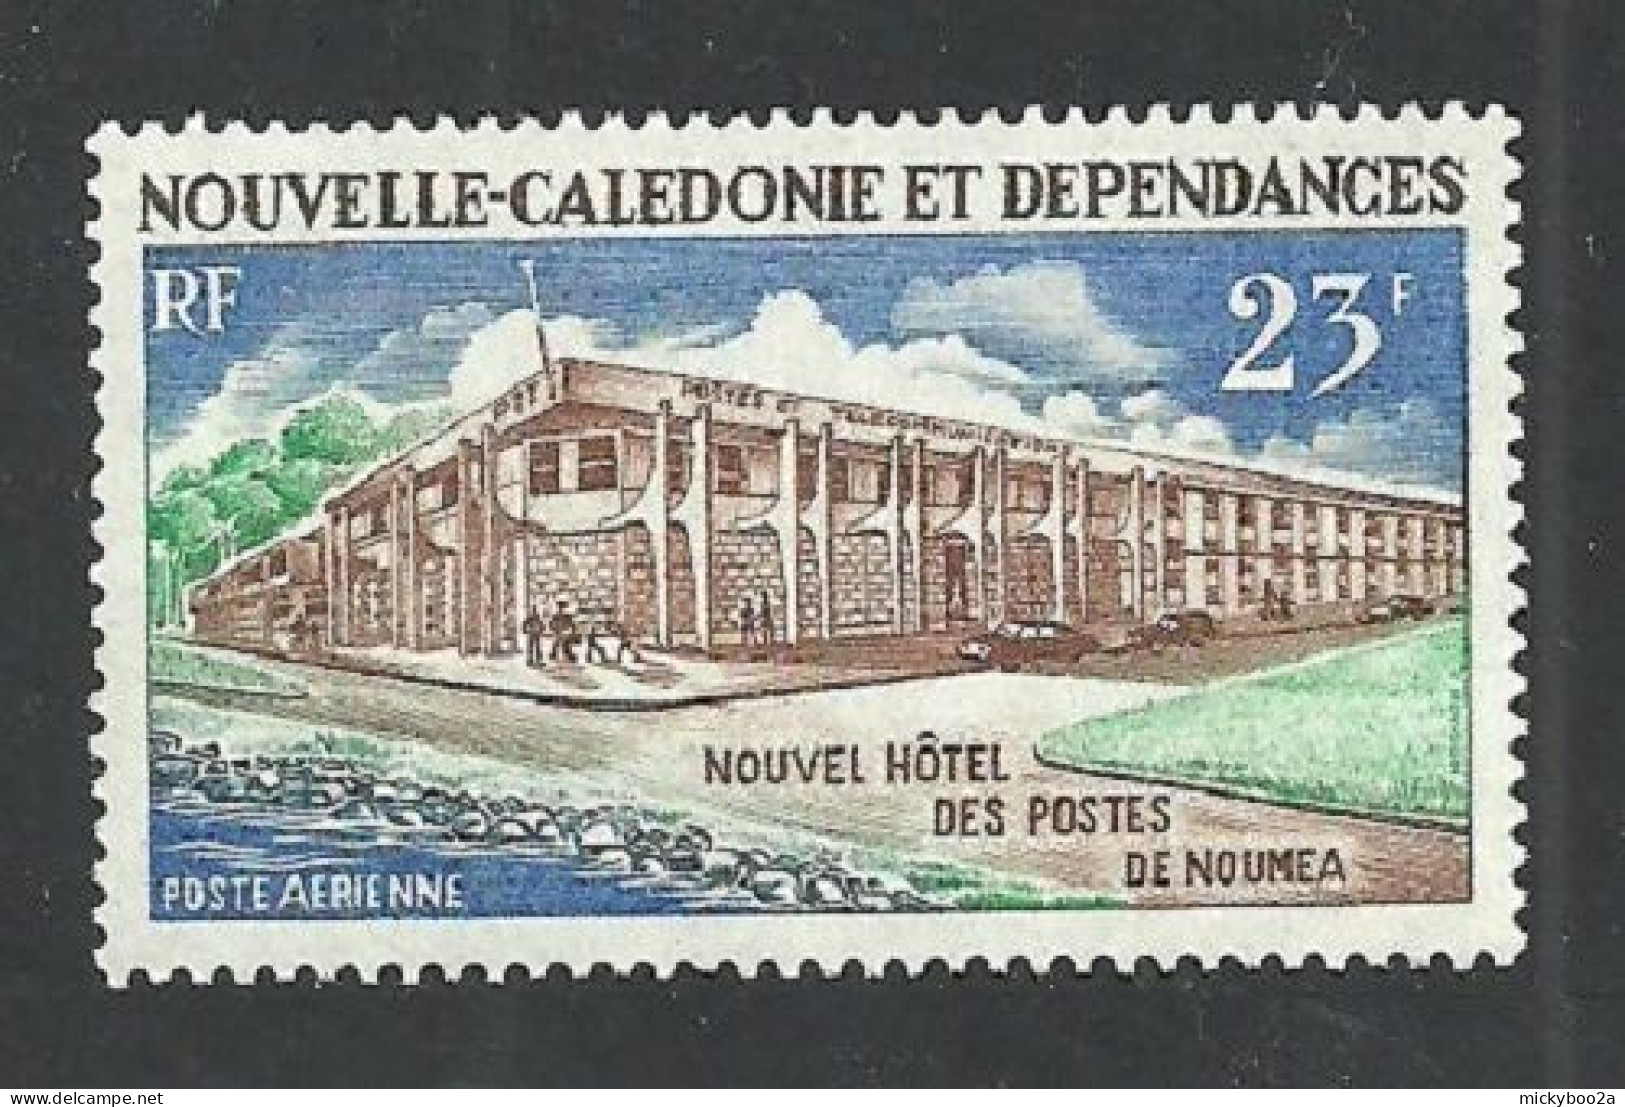 NEW CALEDONIA 1972 POST OFFICE SET MOUNTED MINT - Used Stamps